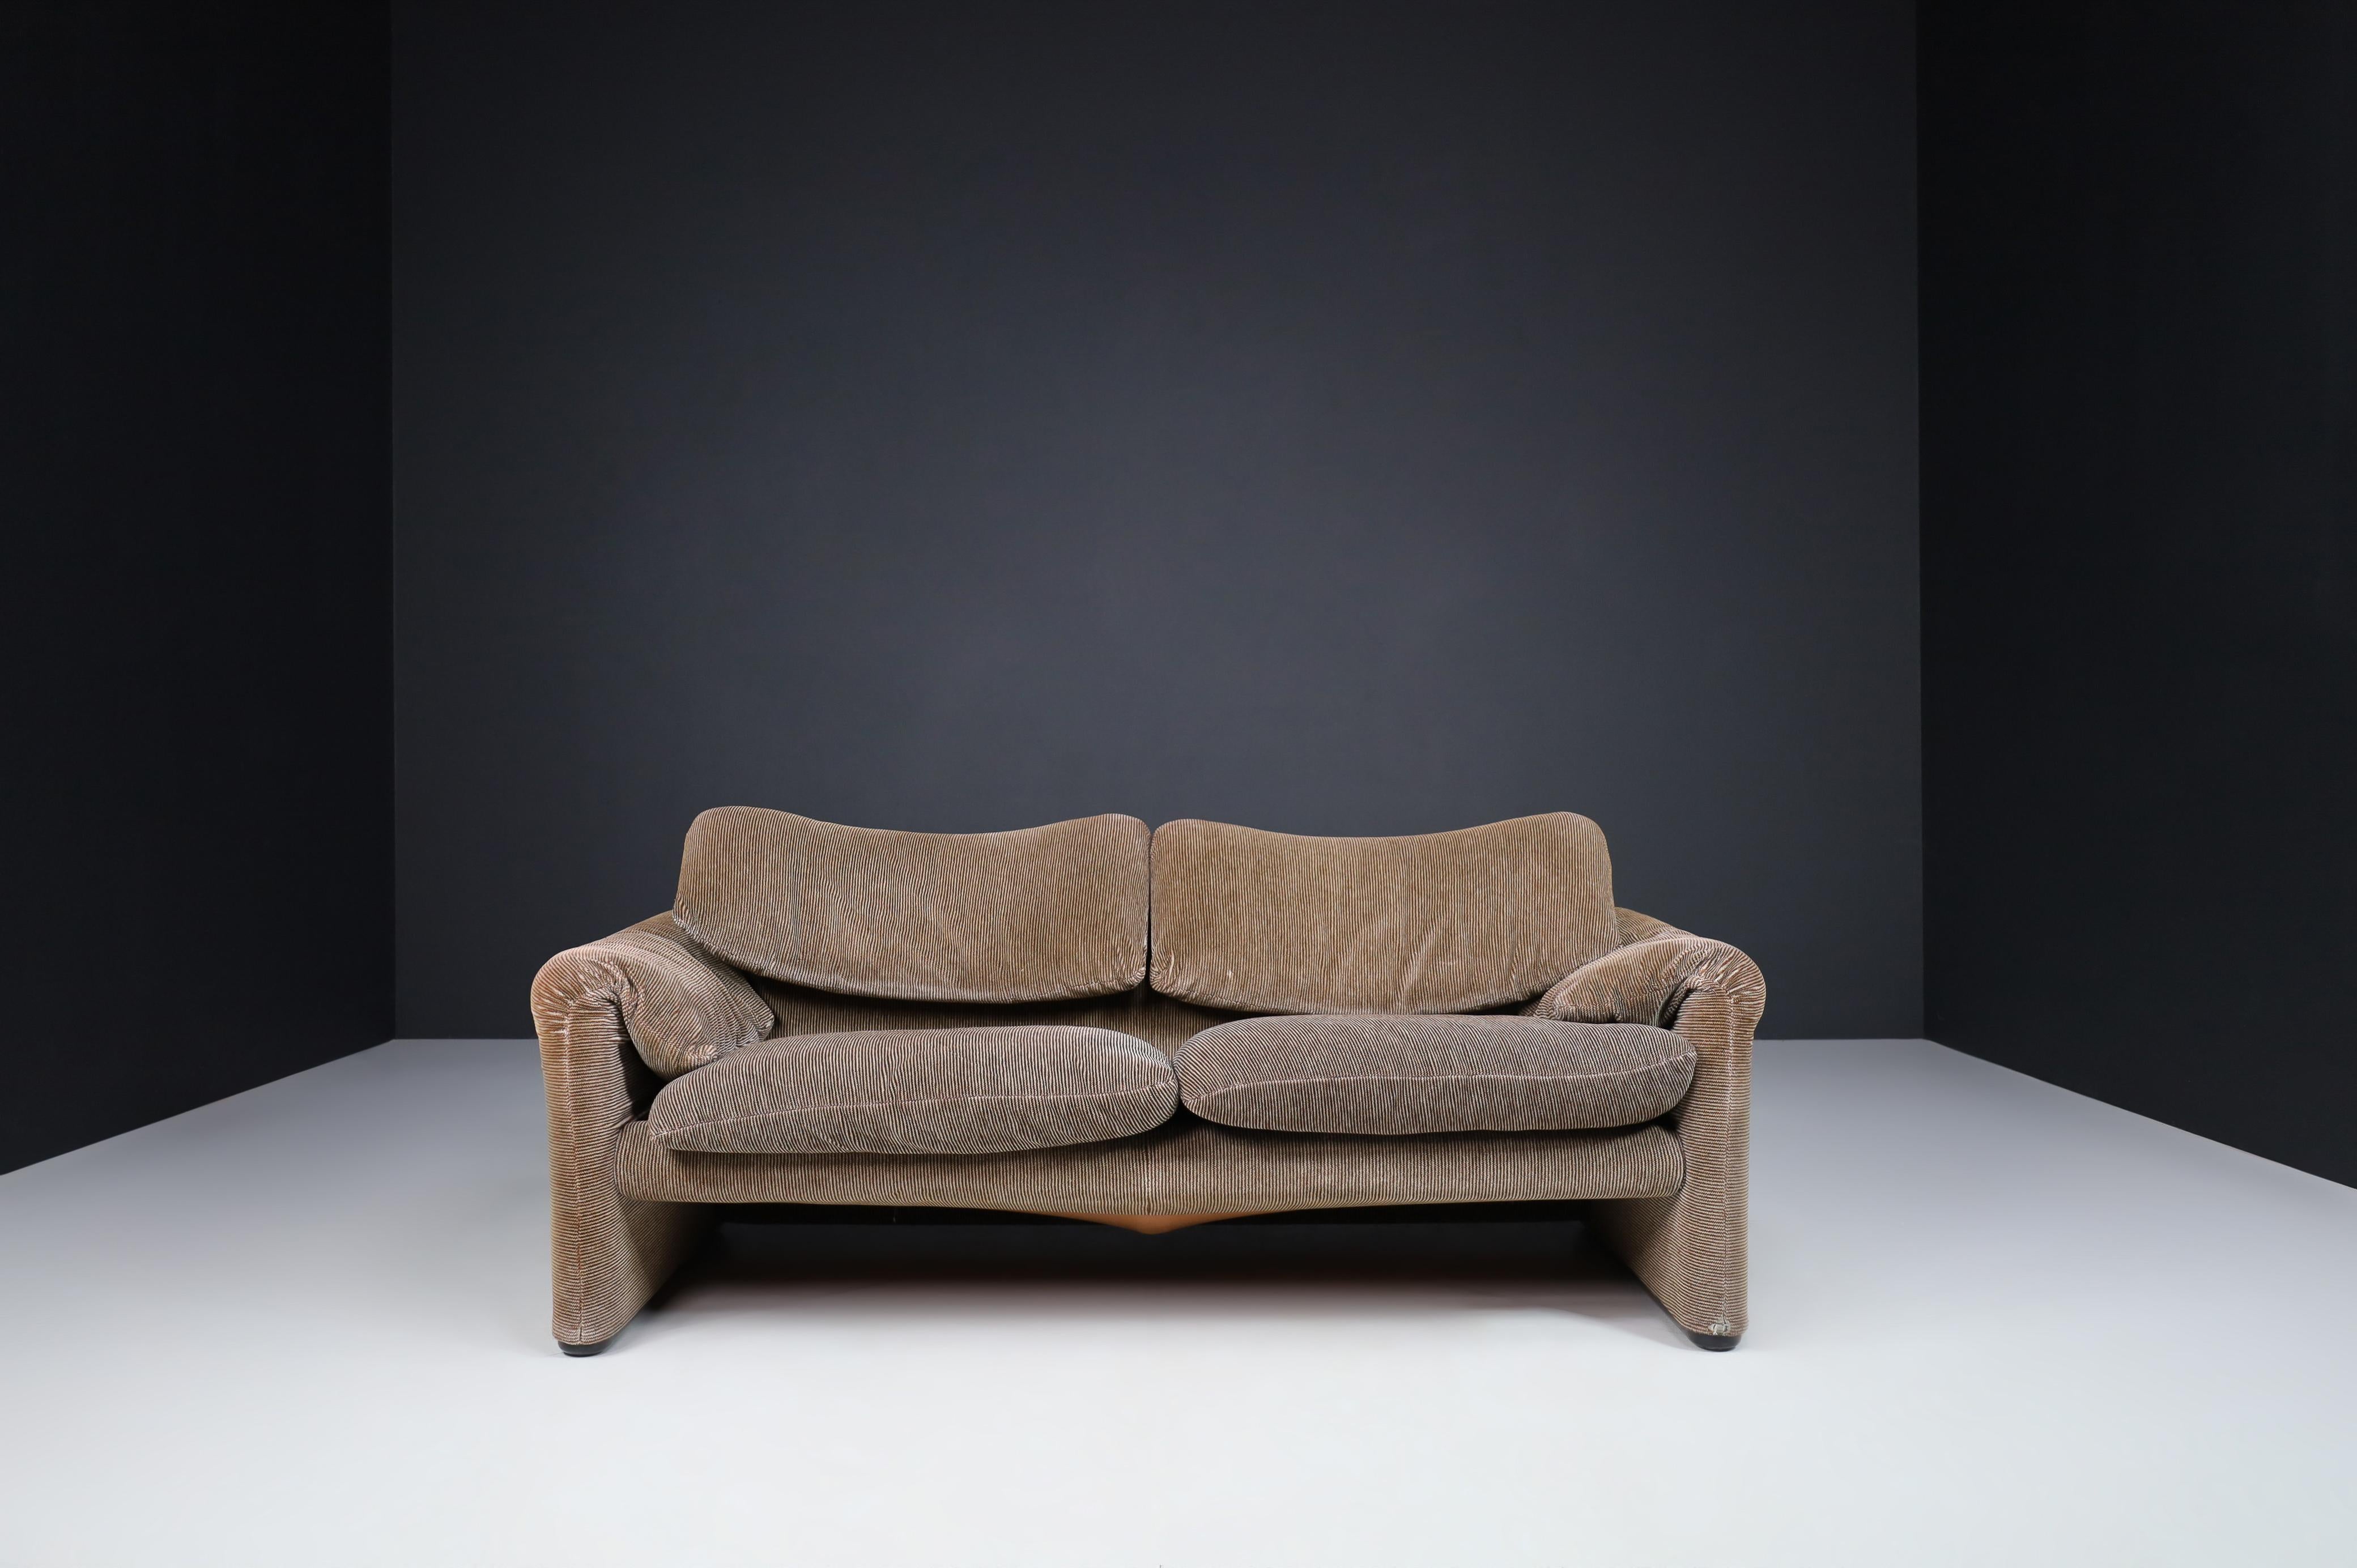 Mid-Century Modern Maralunga Sofas by Vico Magistretti for Cassina, 1970s For Sale